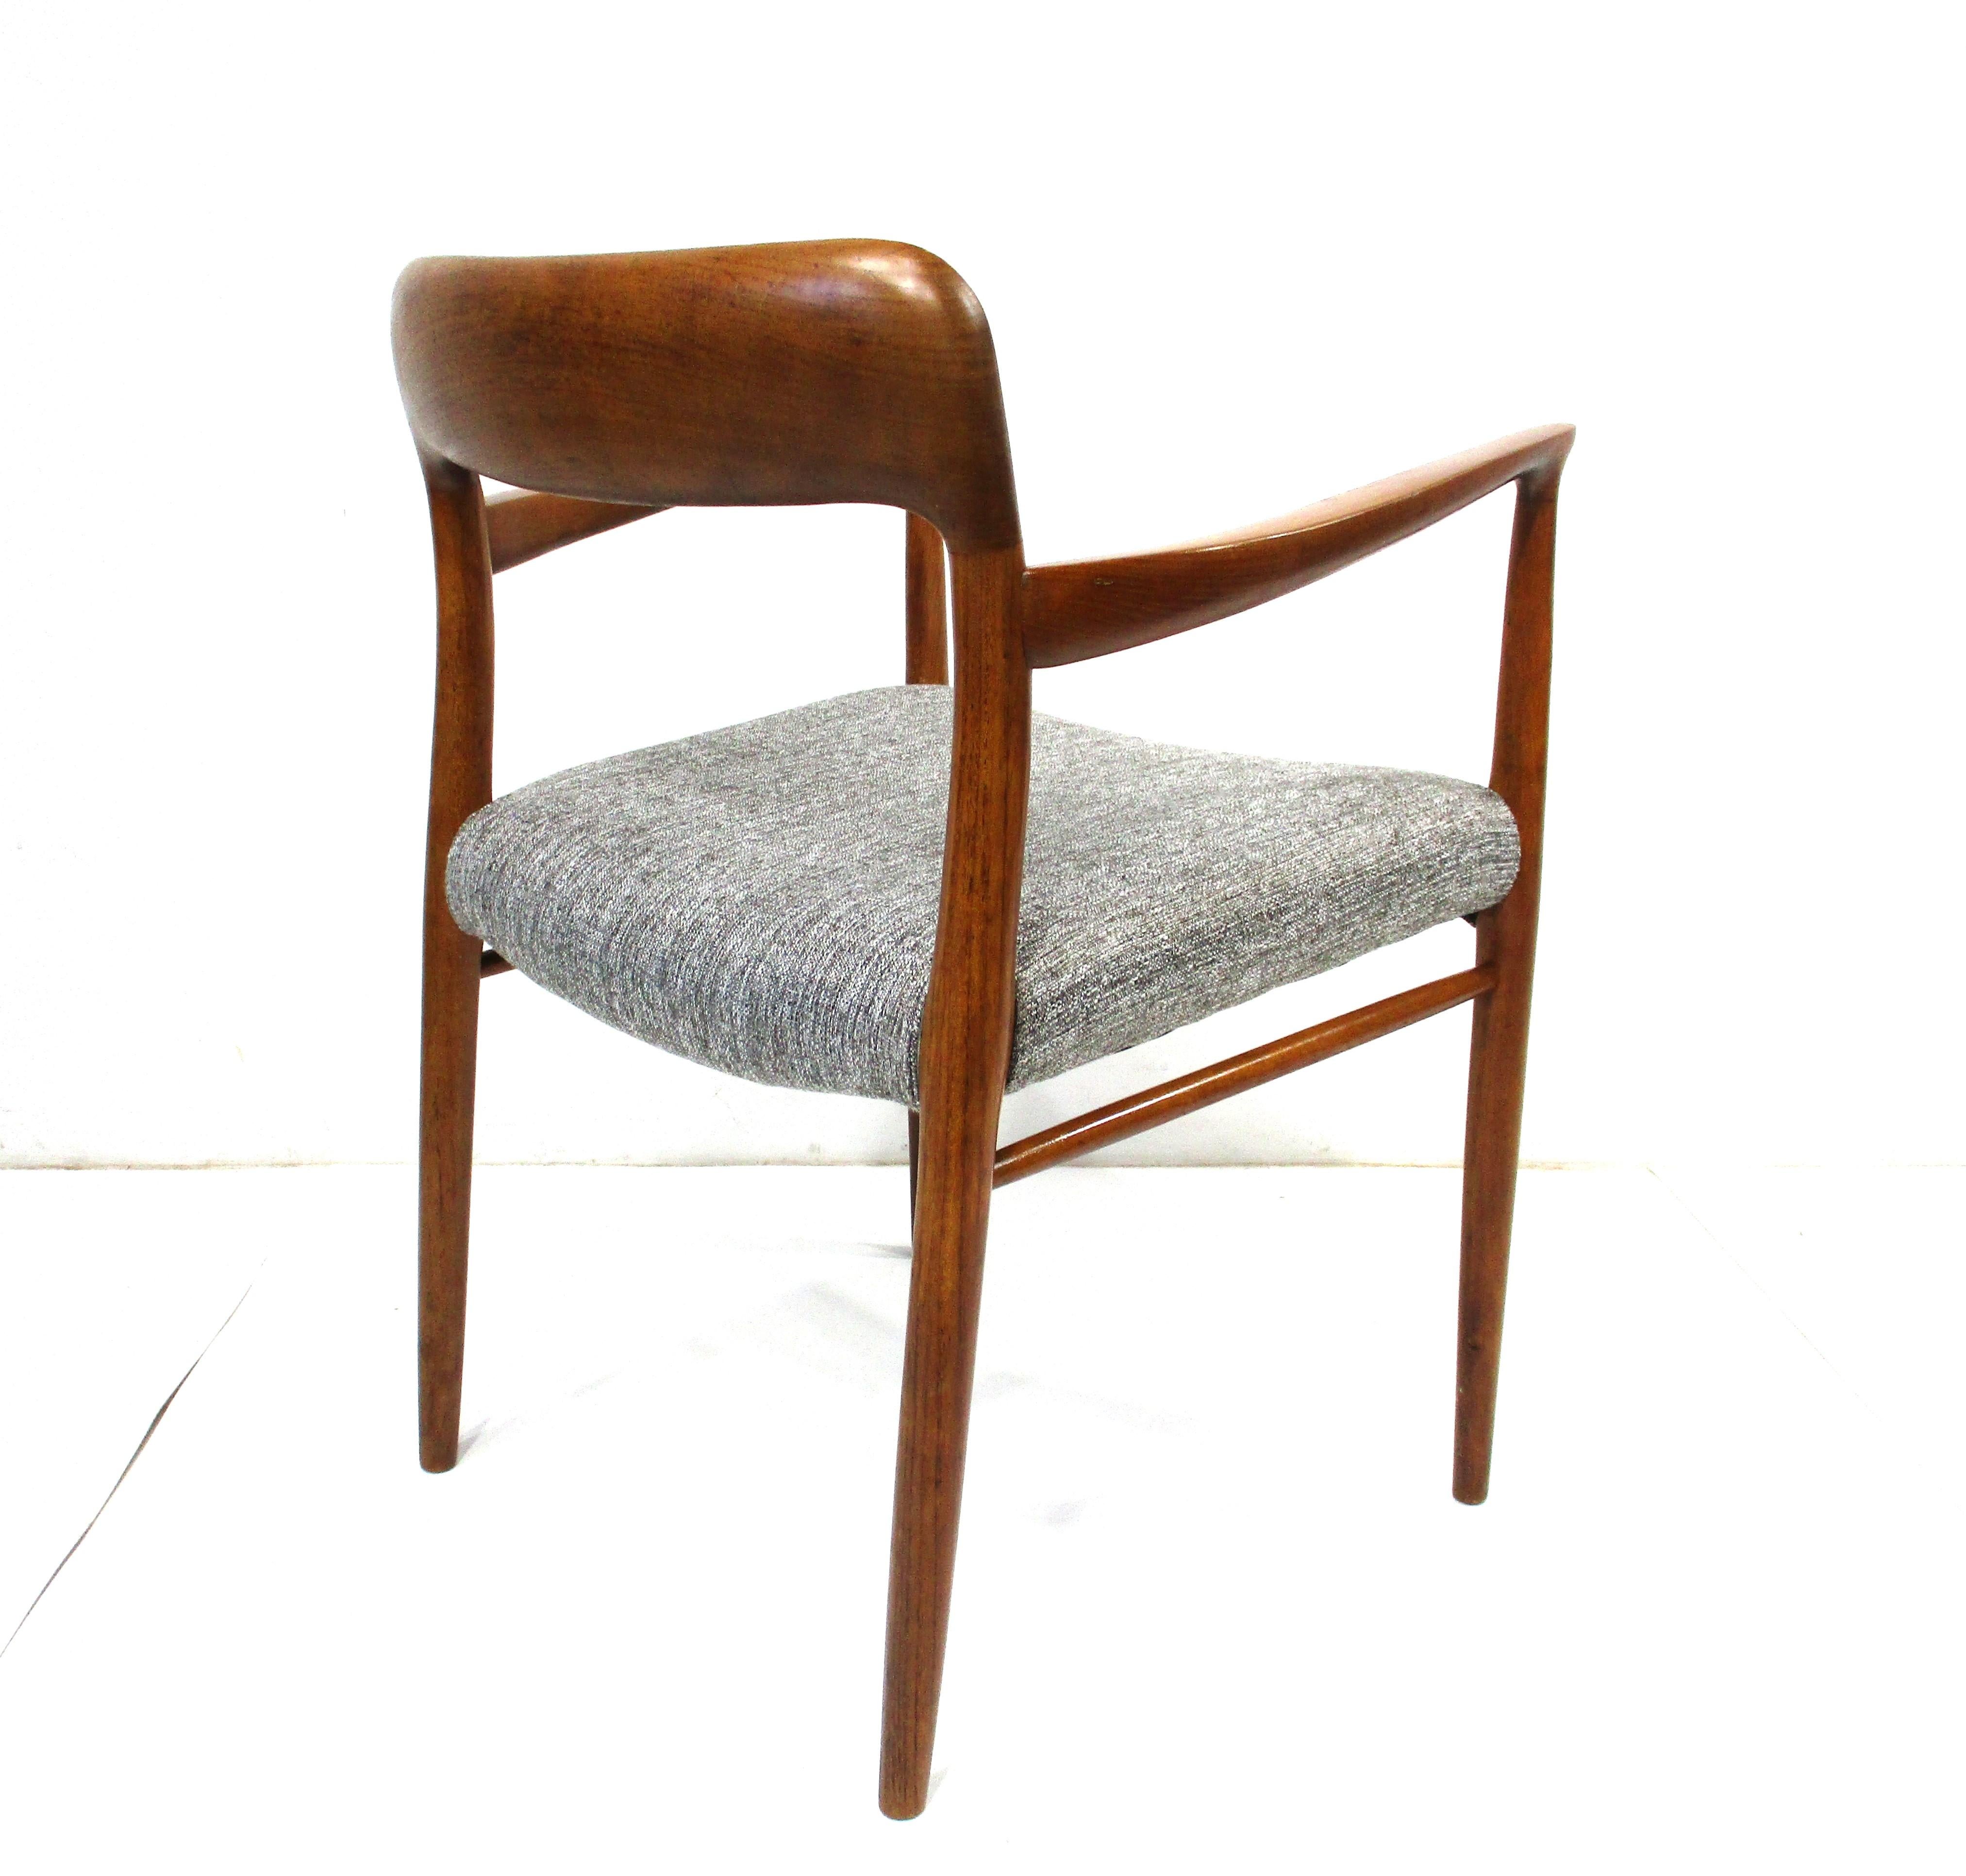 20th Century 8 Teak Upholstered Dining Chairs by Niels O. Moller for J.L. Moller Denmark   